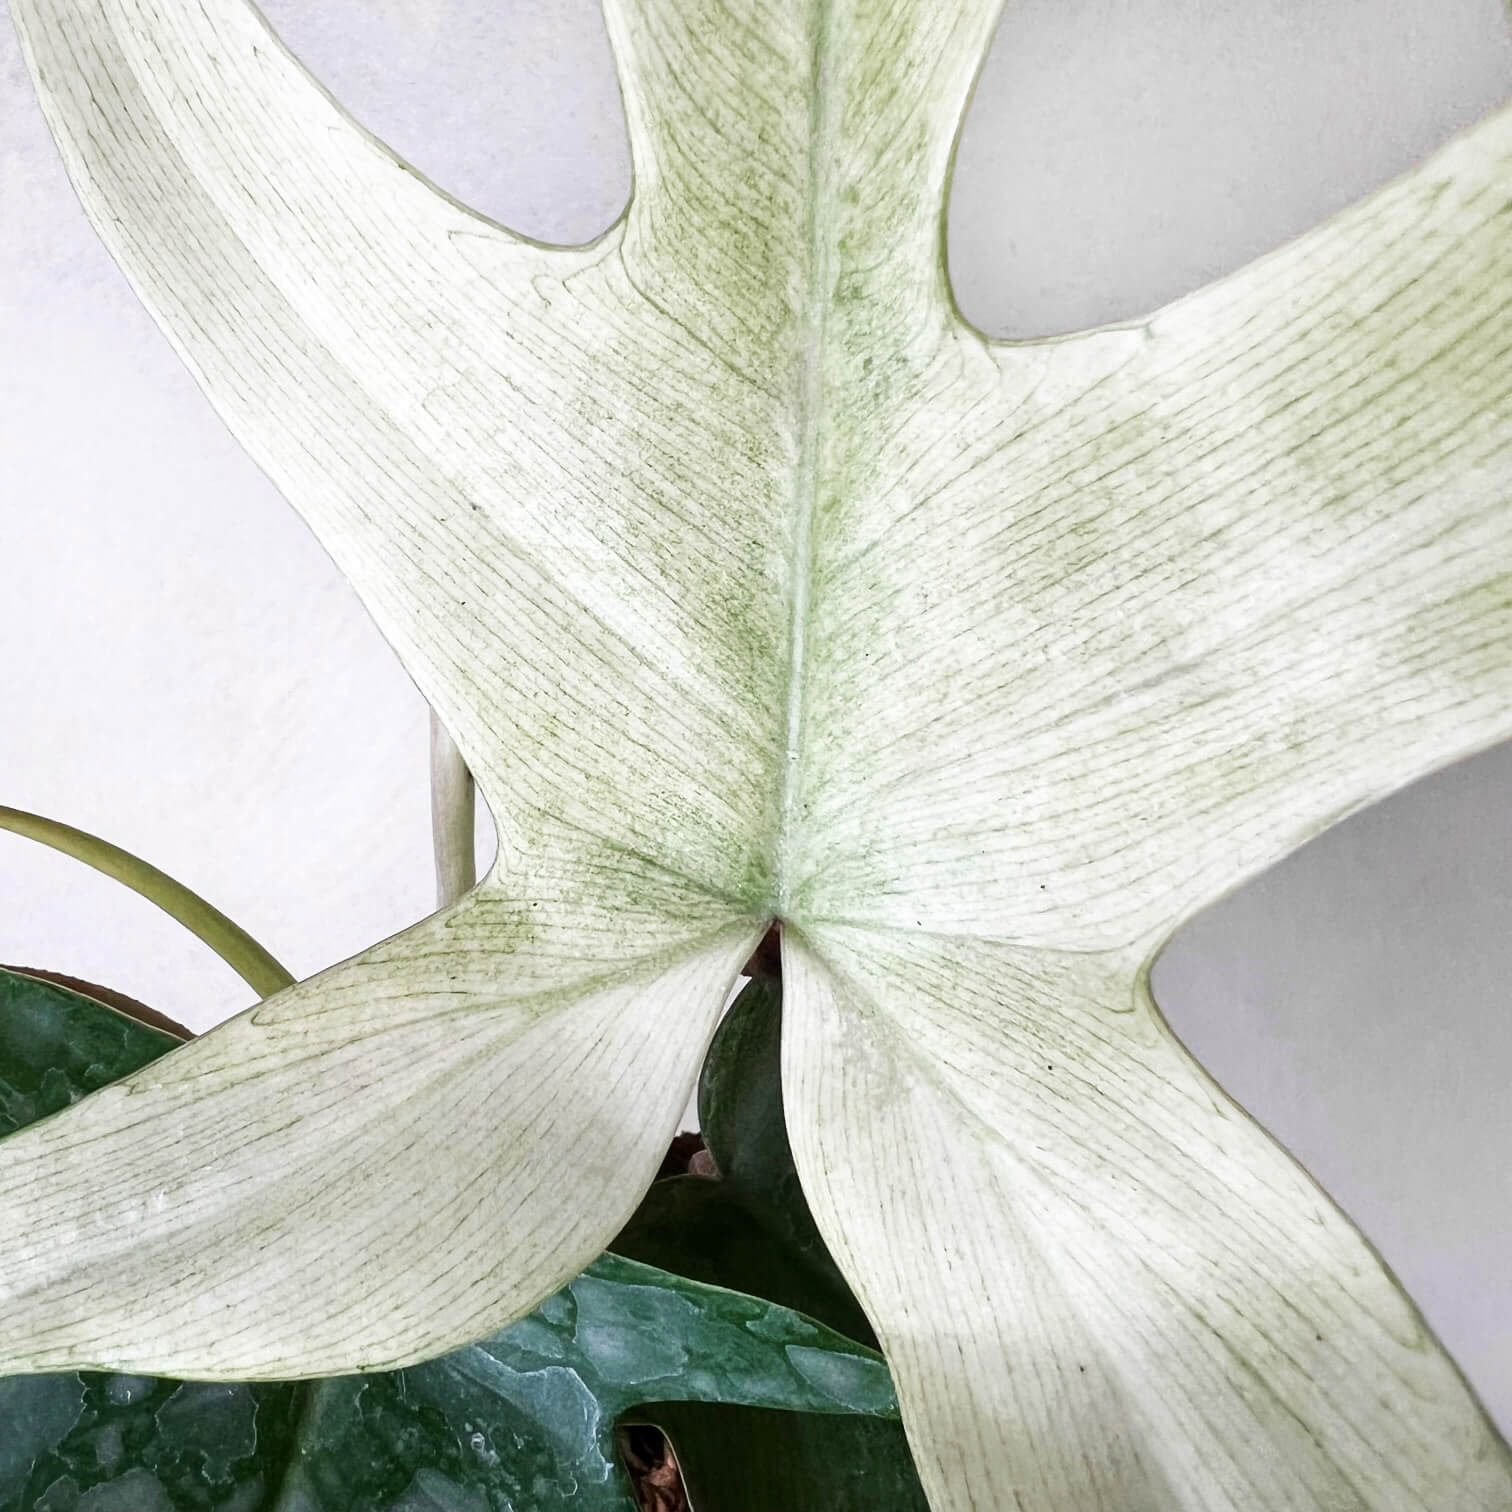 Philodendron Florida Ghost